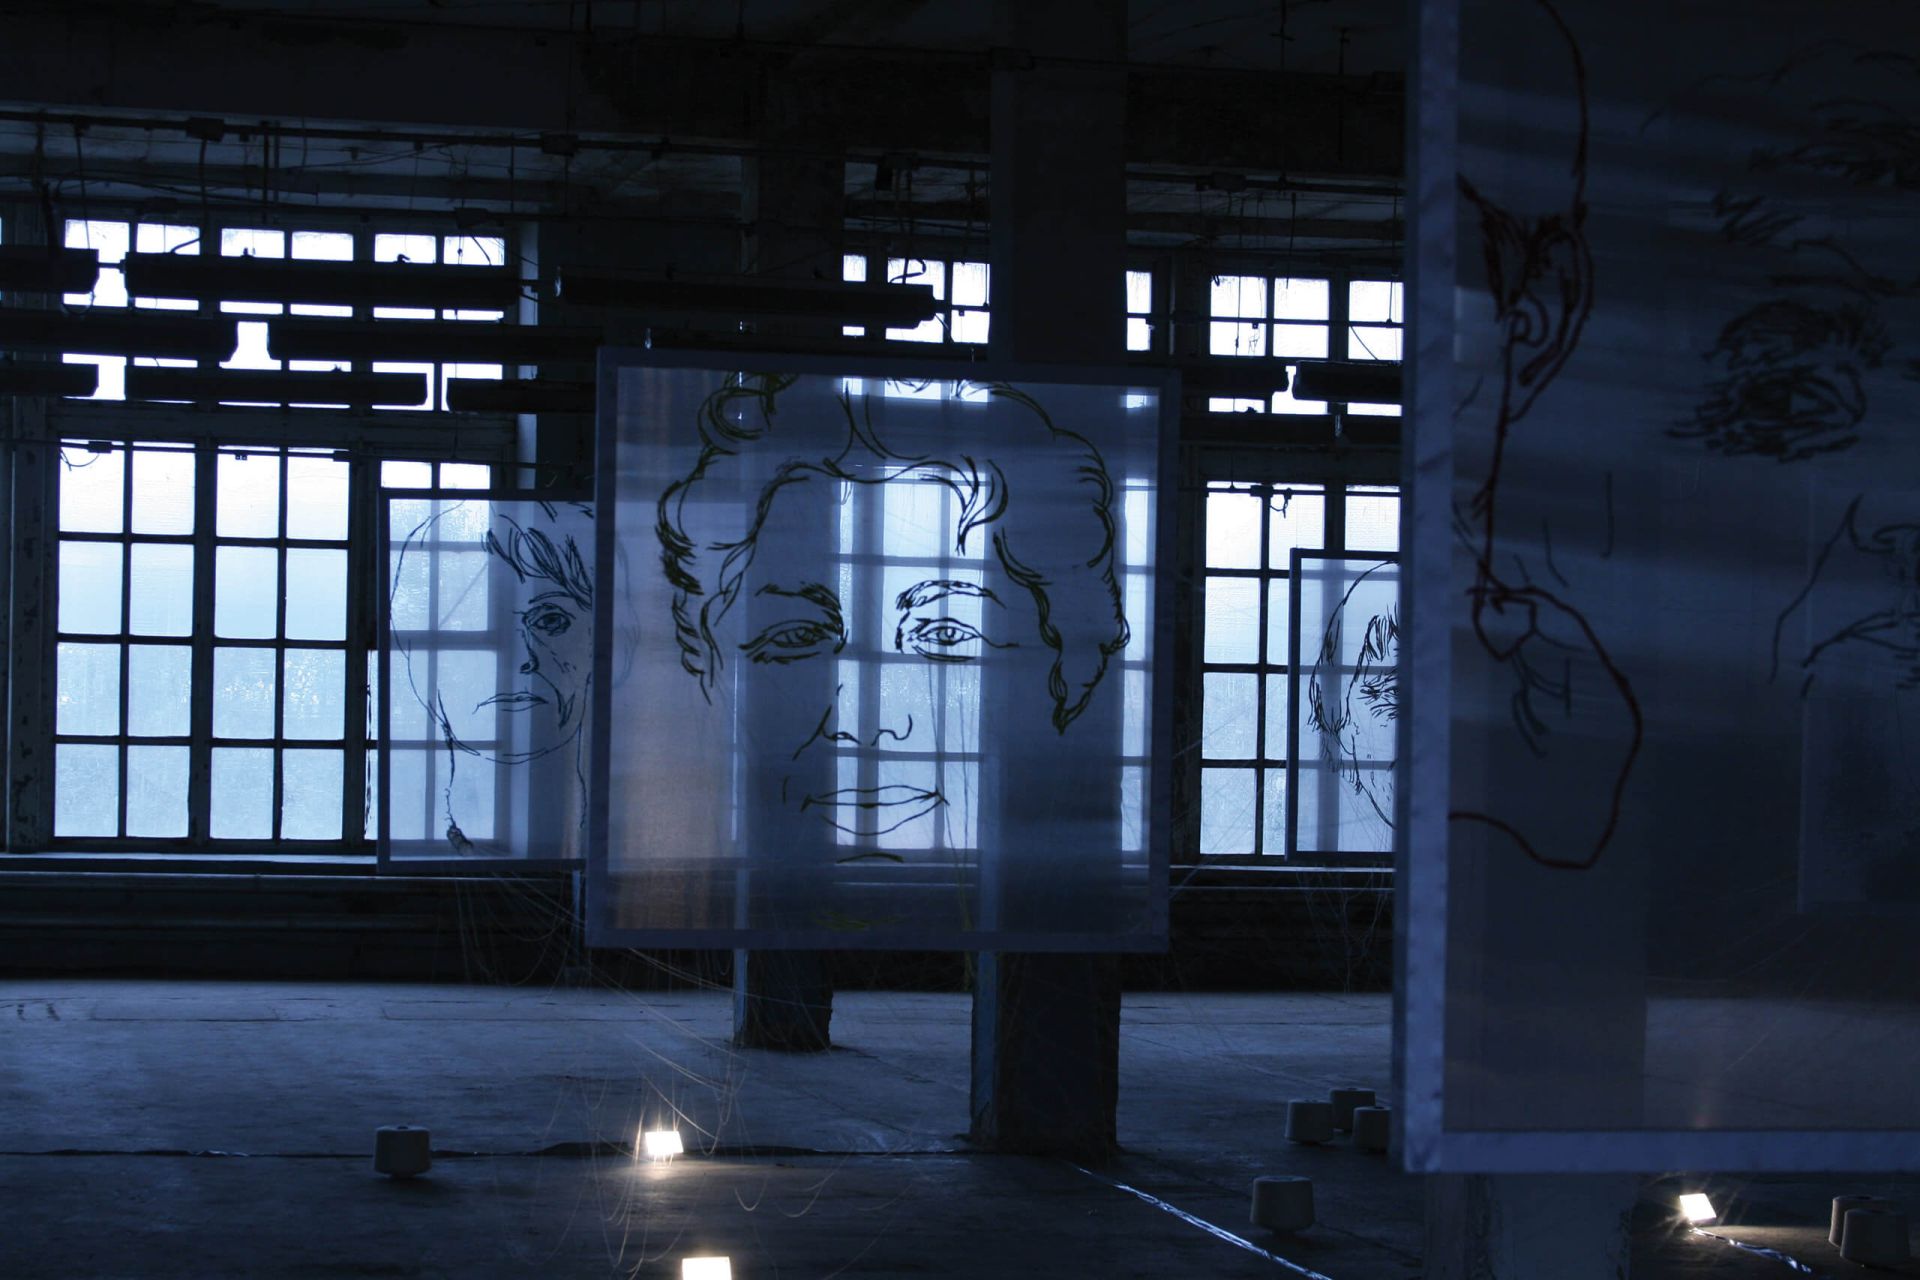 Clotho installation,  2010. The First Ural Biennale, Ekaterinburg. Courtesy of the artist and Marina Gisich Gallery, Saint Petersburg